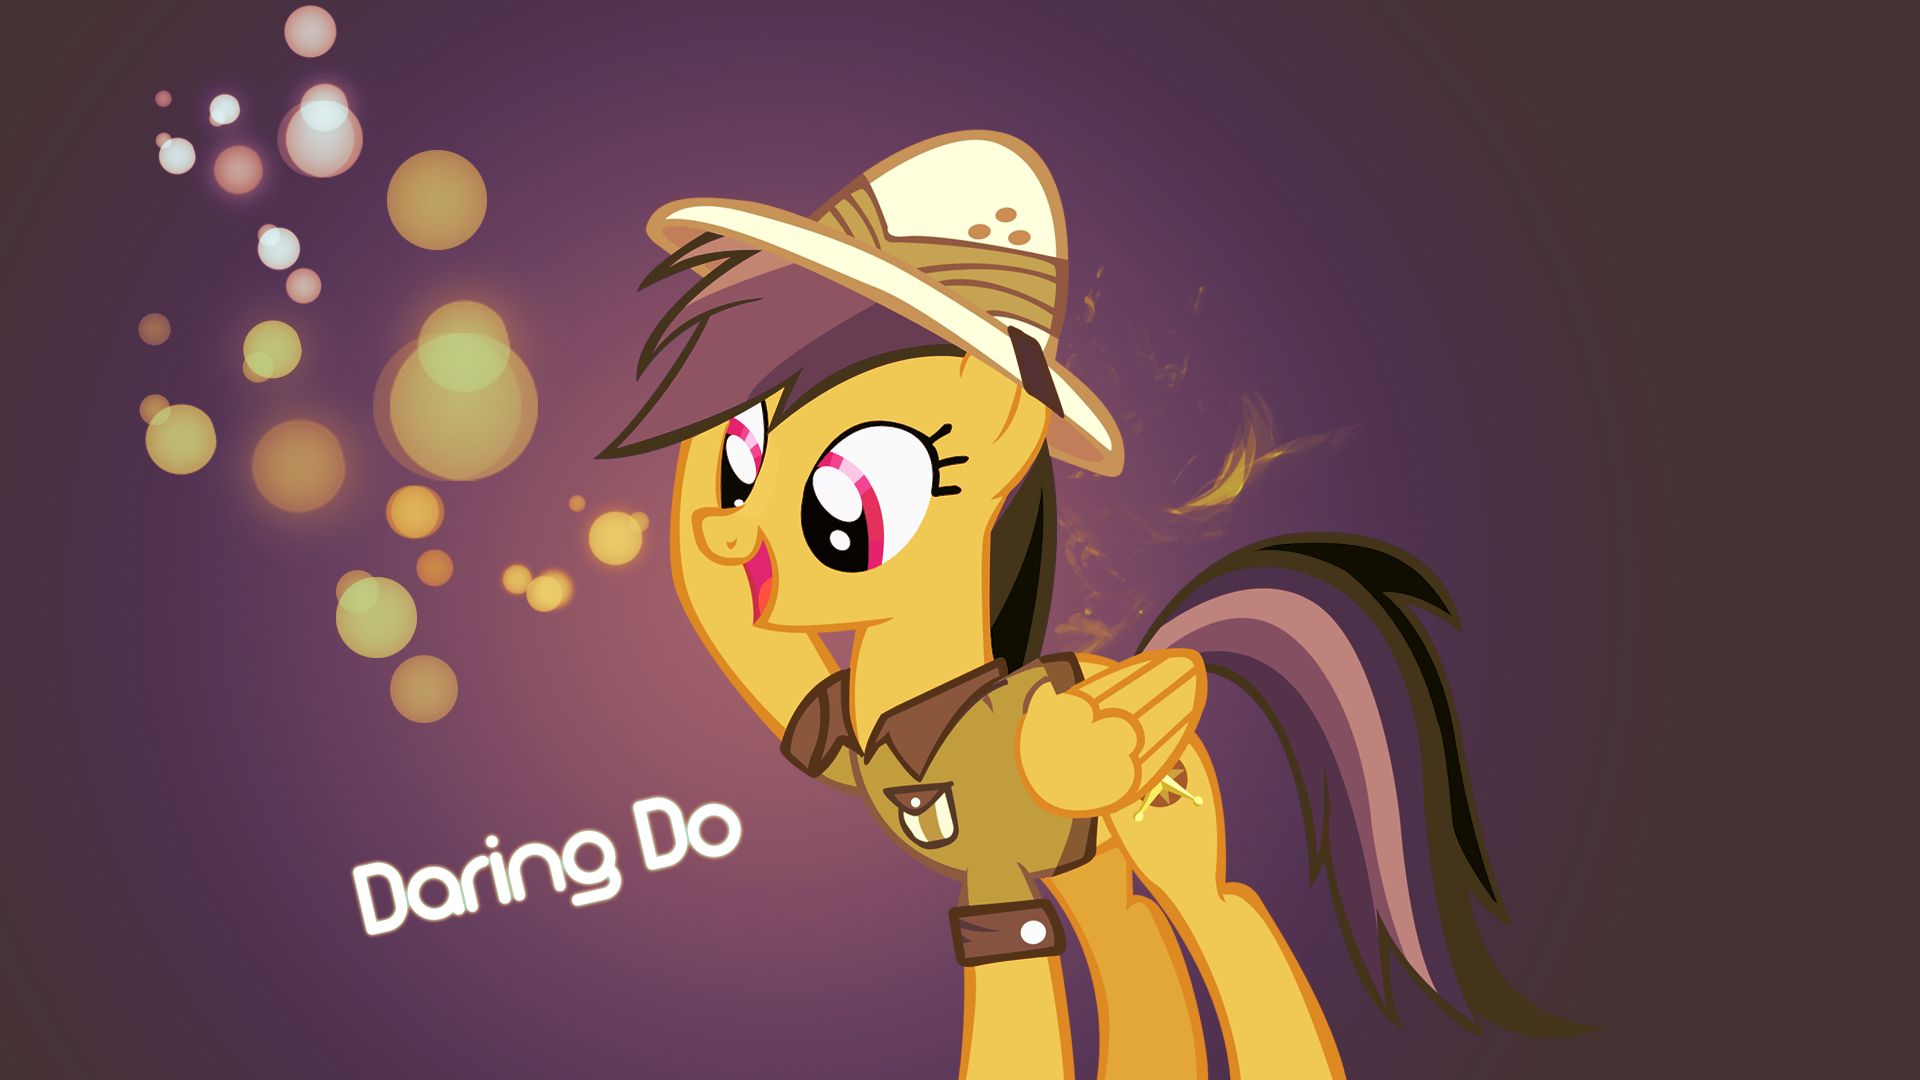 Daring Do wallpaper by BonesWolbach and SoundmOtion